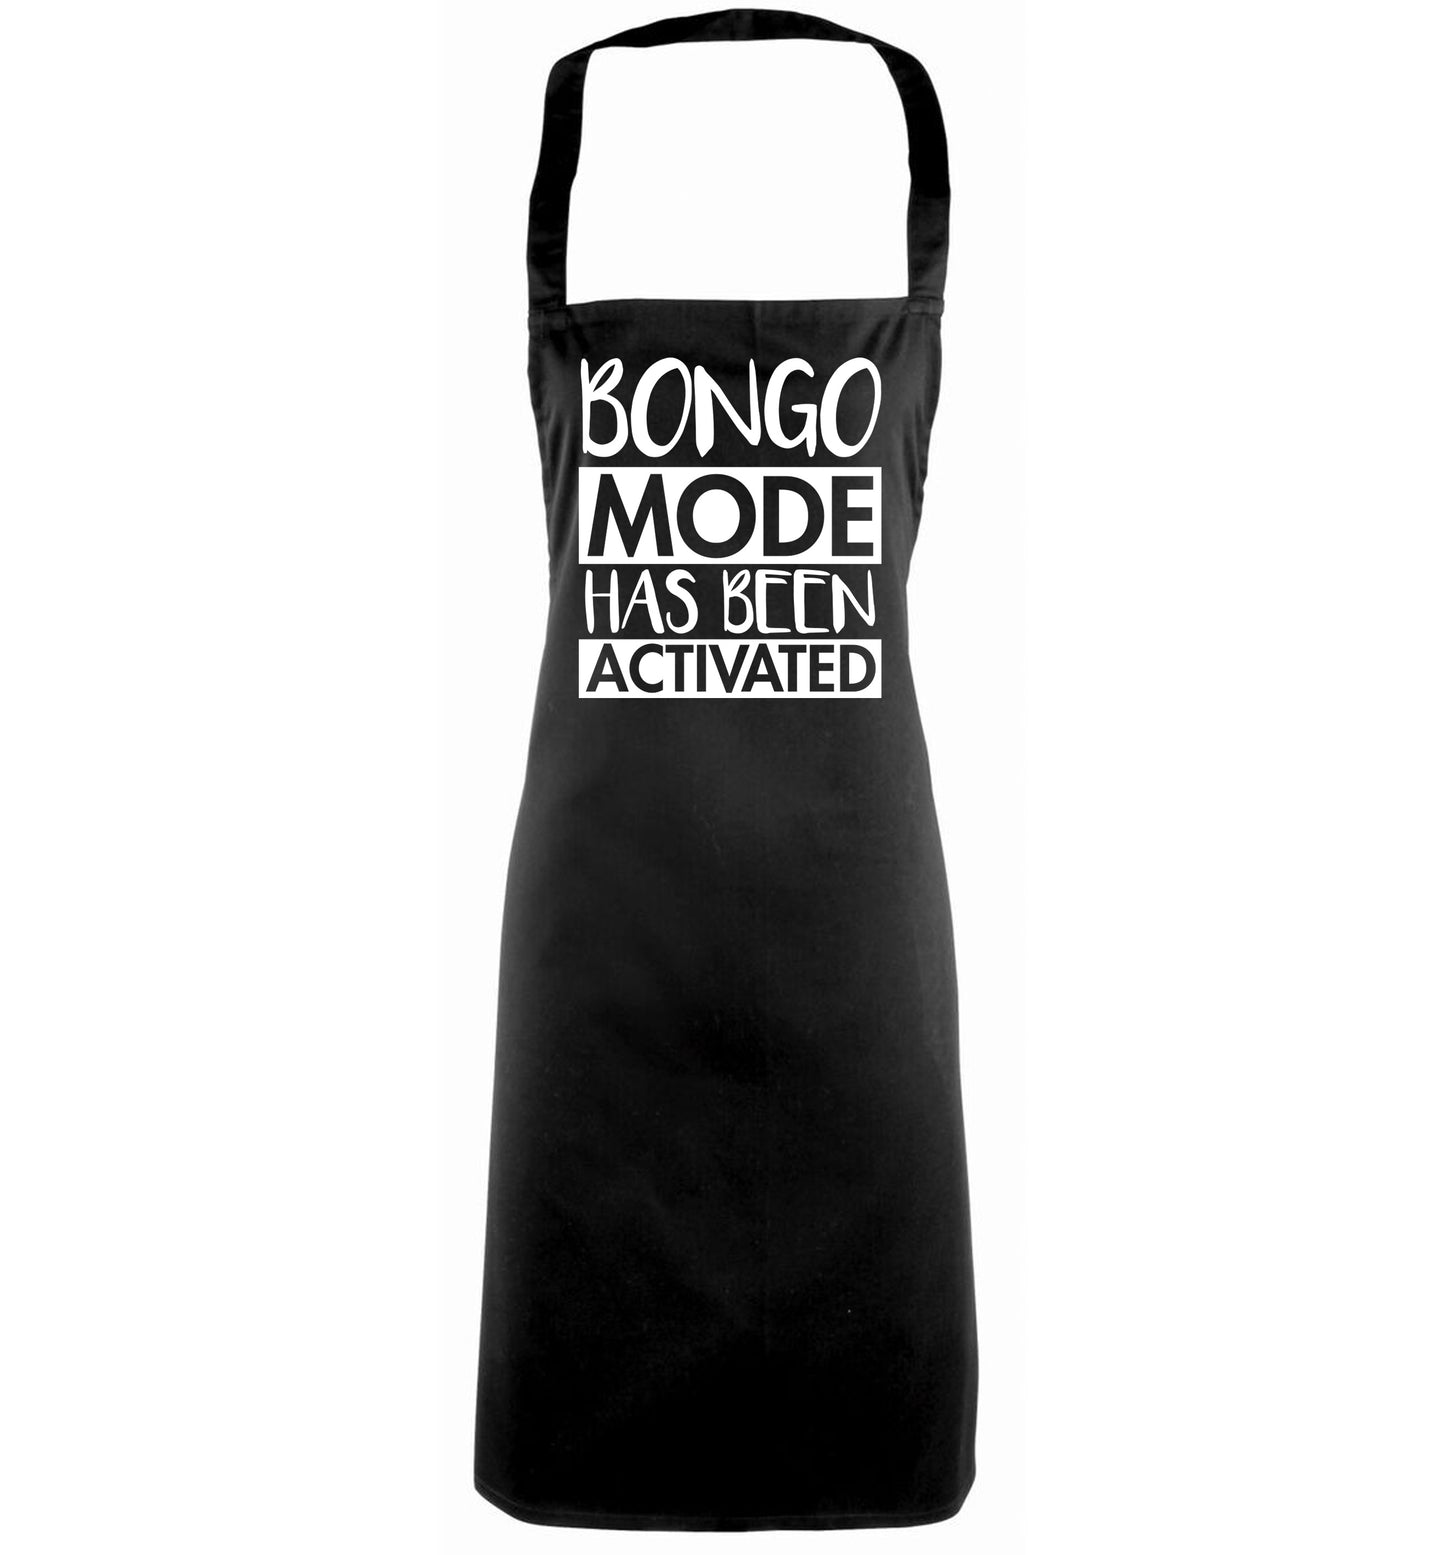 Bongo mode has been activated black apron